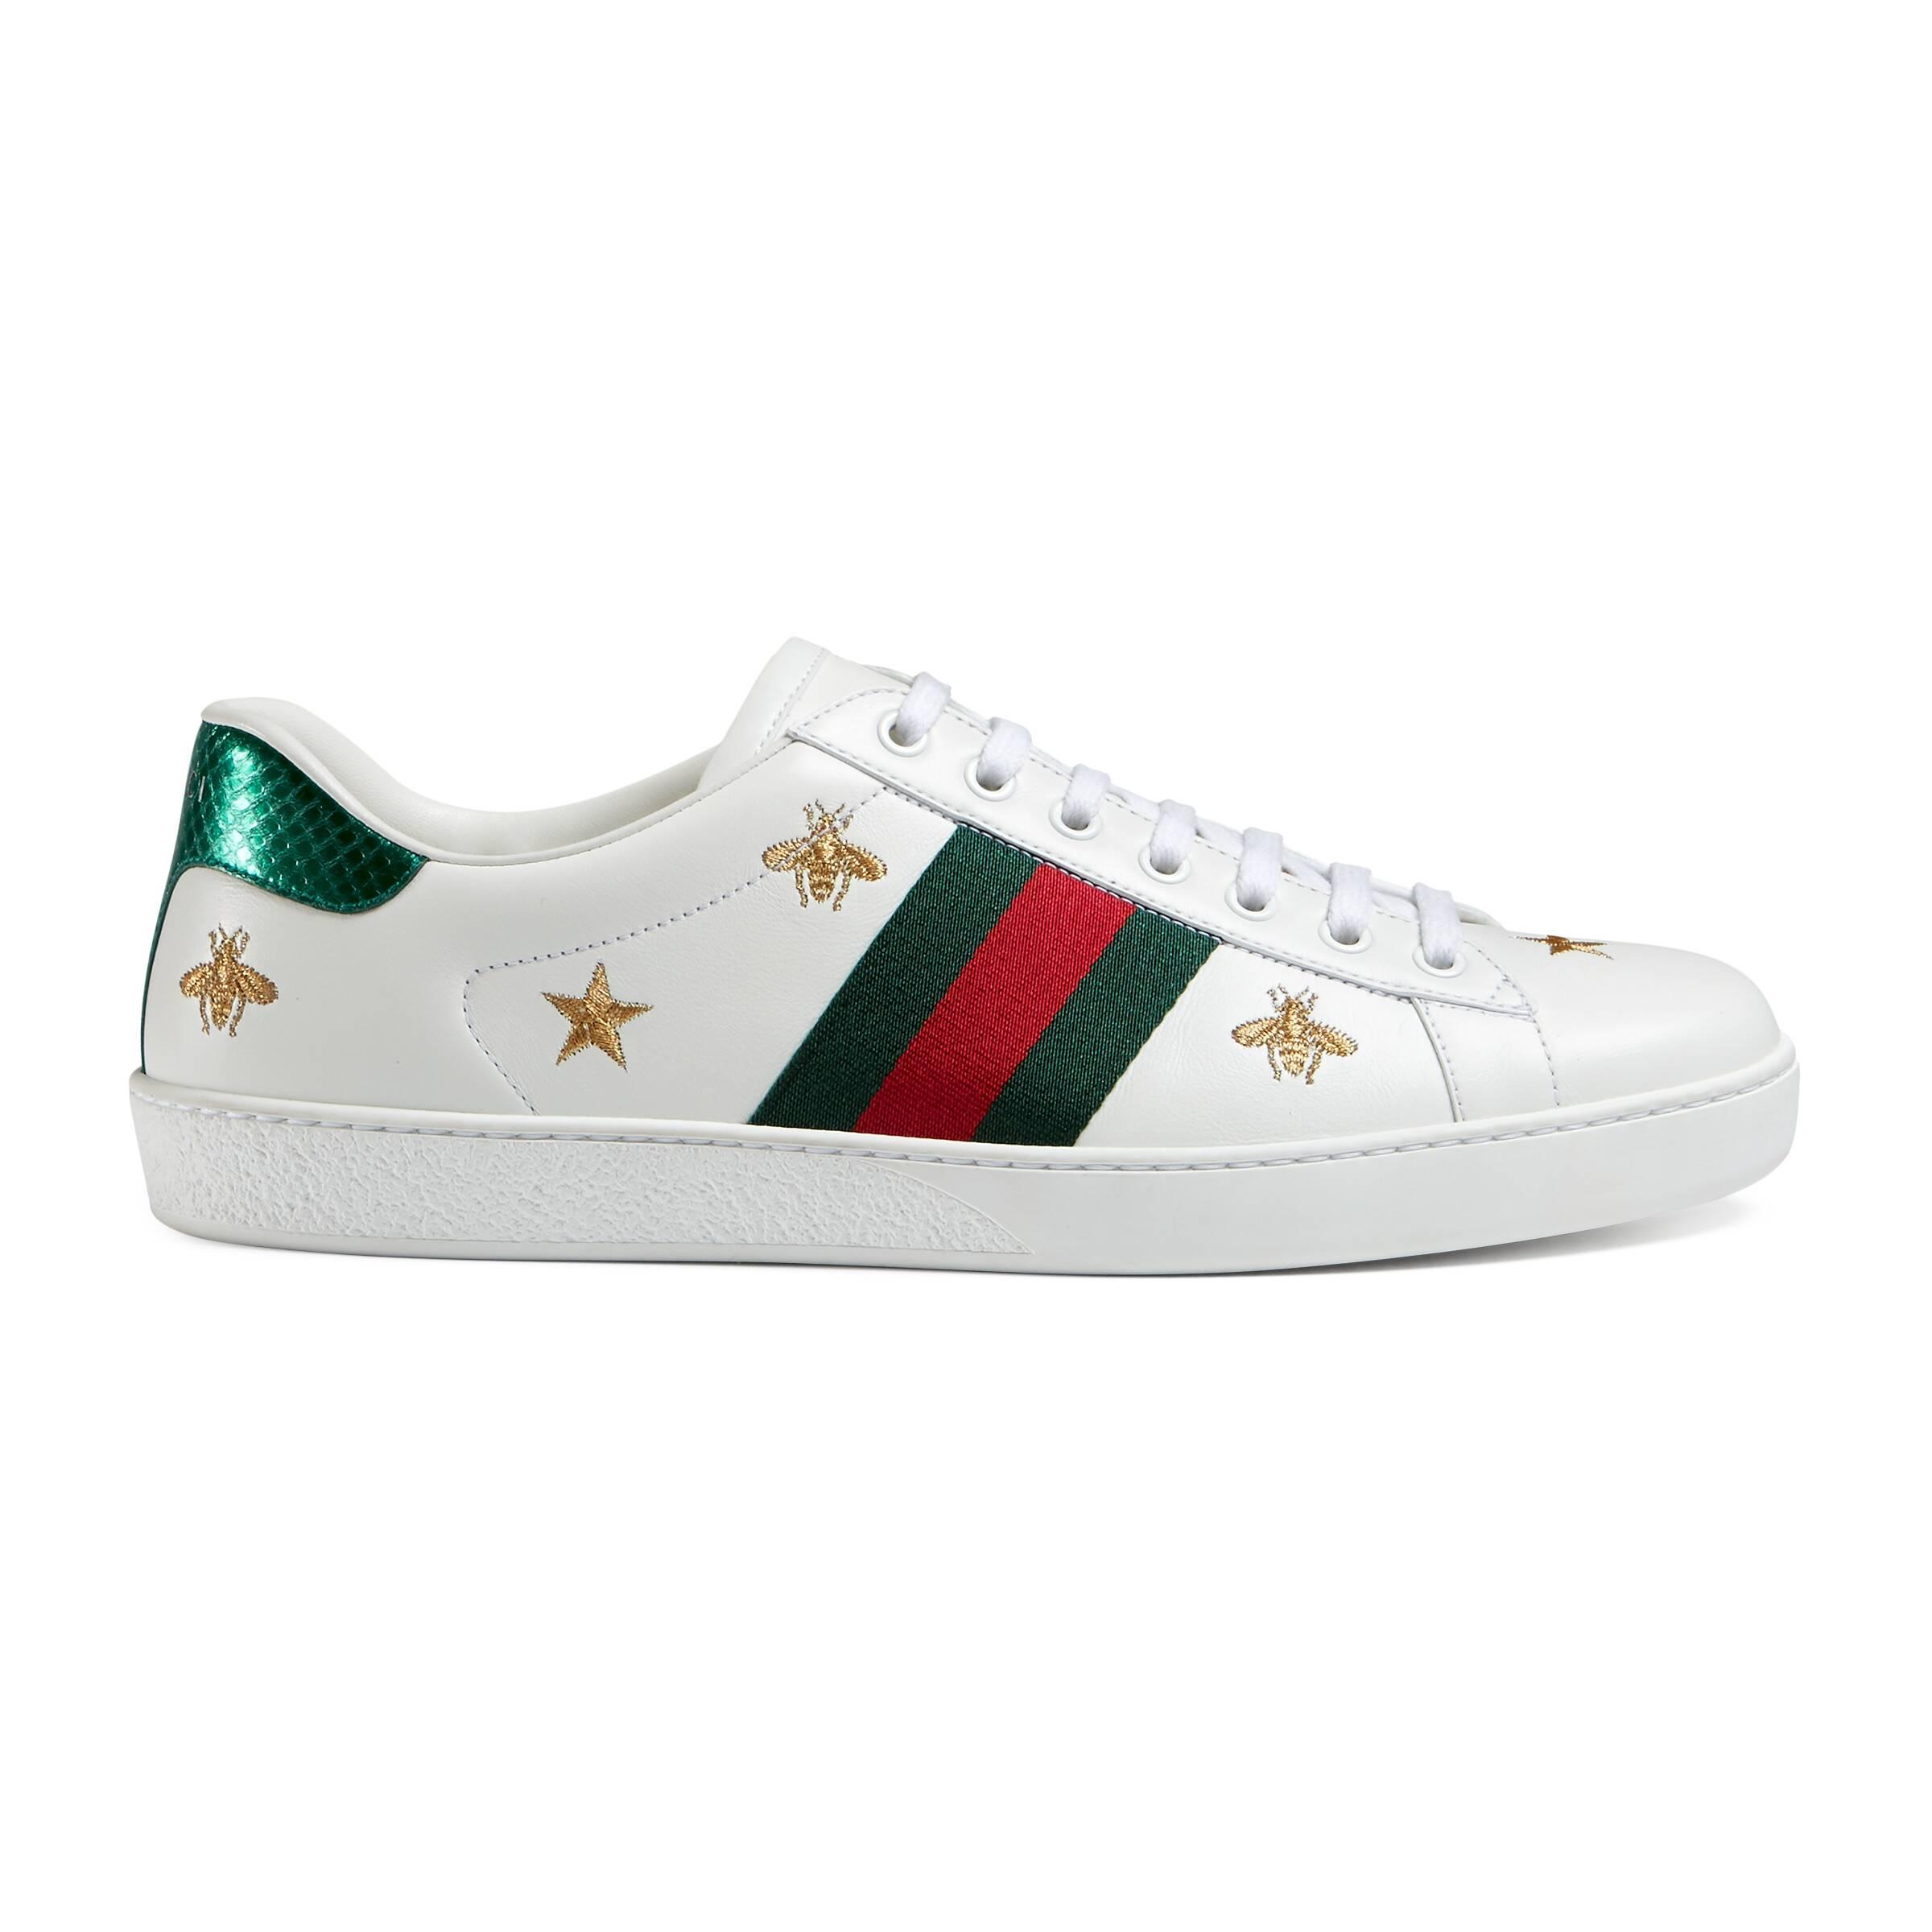 Gucci Leather Ace Embroidered Low-top Sneaker in White Leather (White